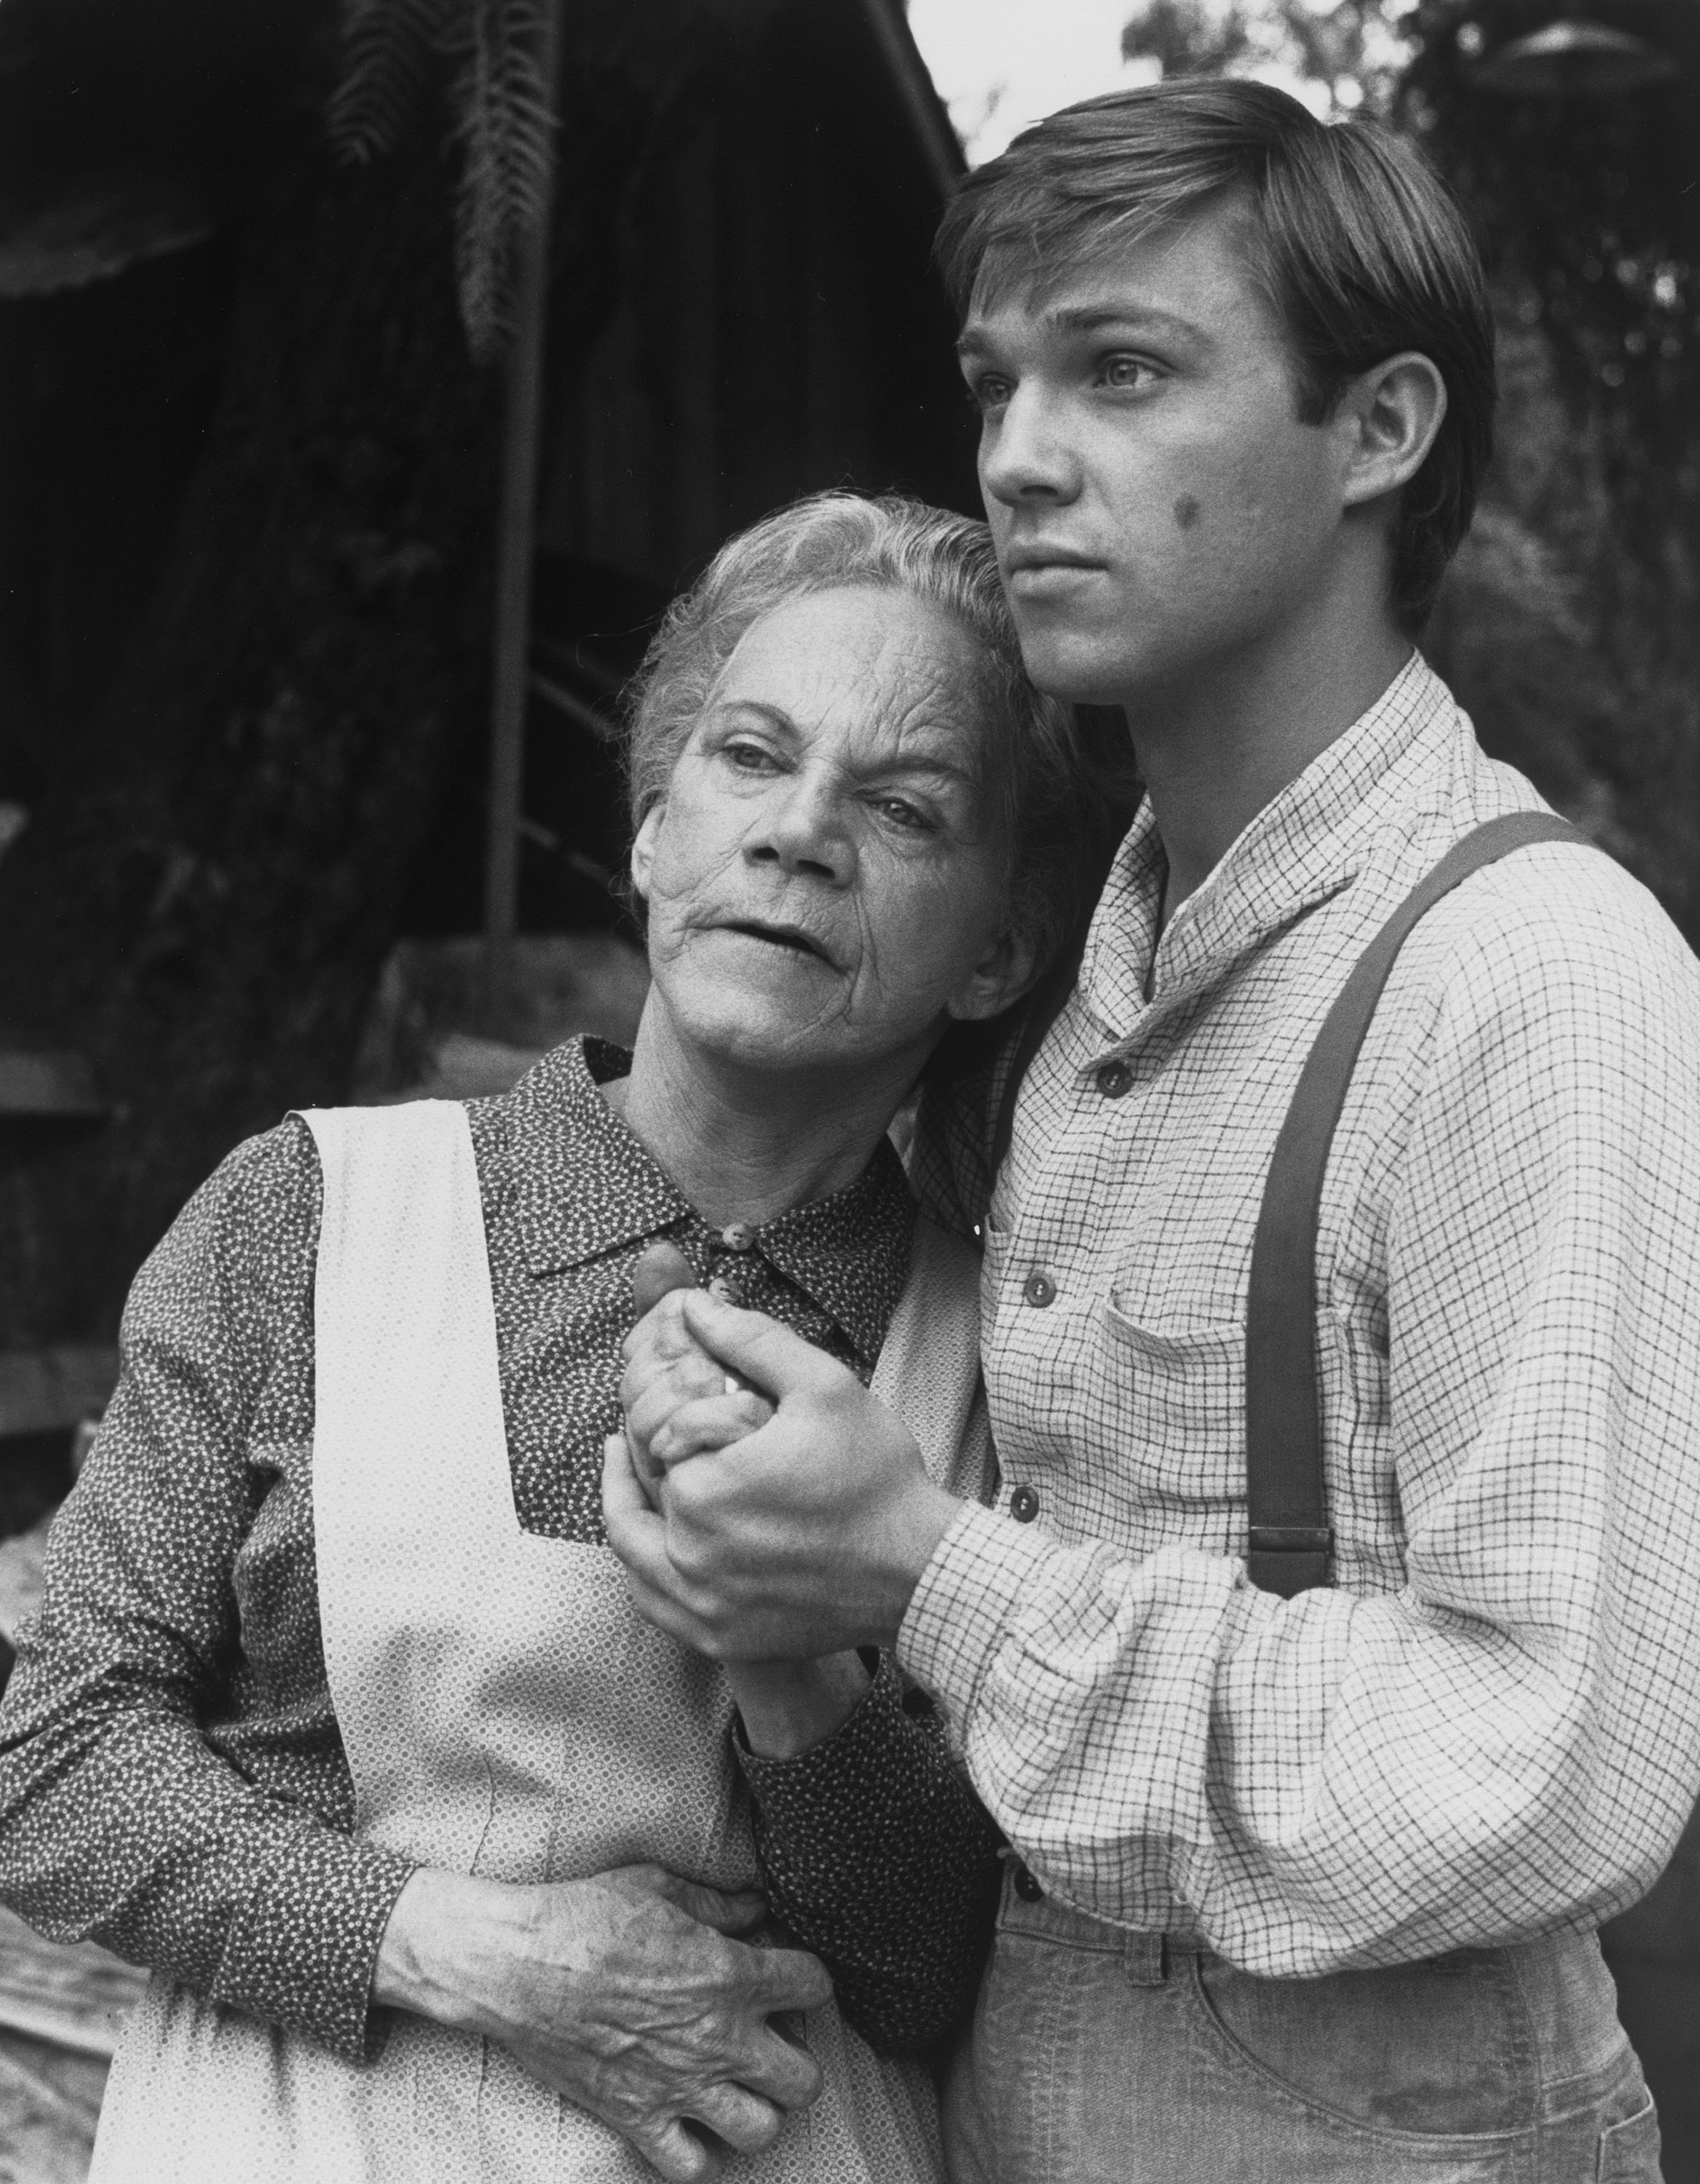 Ellen Corby starring alongside her co-star Richard Thomas in a scene from "The Waltons" on  June 3, 1976. | Source: Getty Images